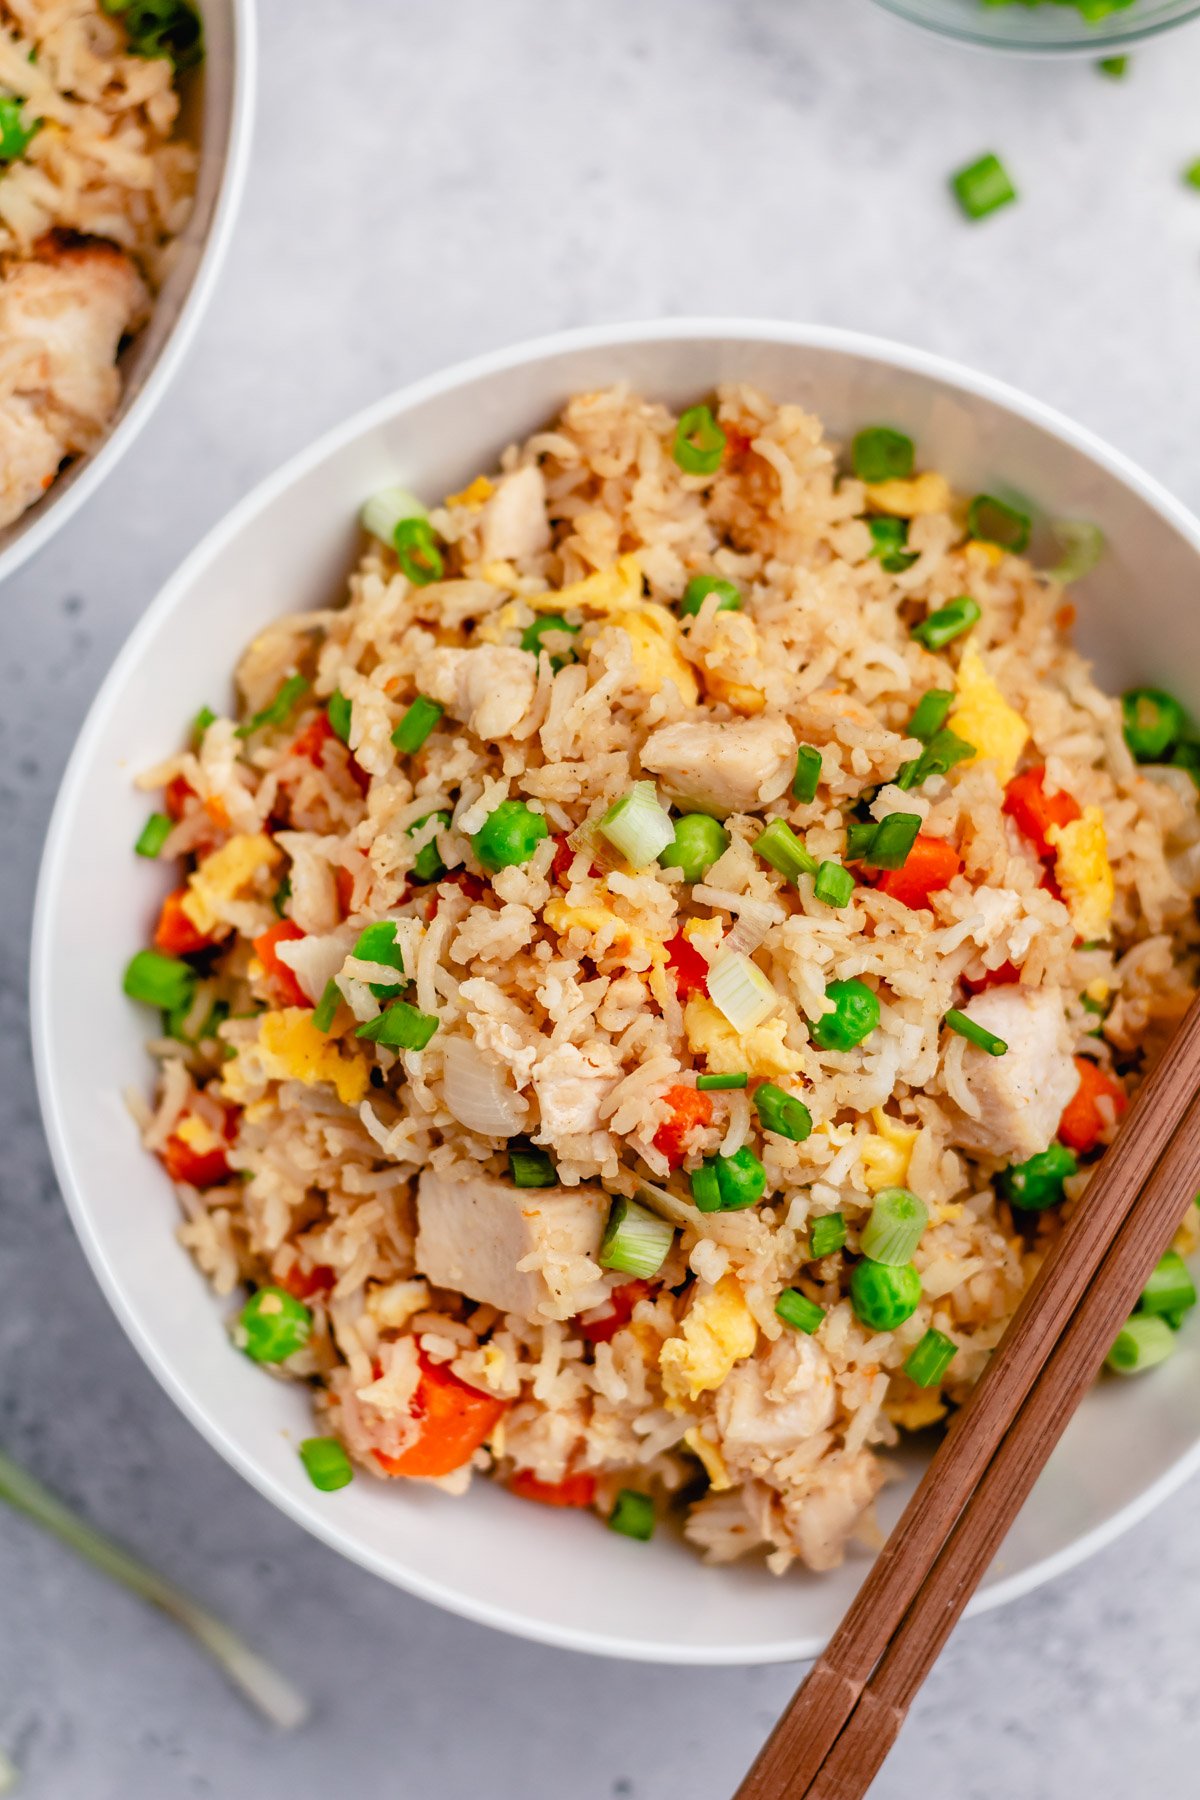 Instant pot chicken fried rice is the perfect one pot recipe for a fast and easy weeknight meal with no mess. It has just a few ingredients and is naturally gluten free and dairy free. You can easily swap out the chicken for extra veggies to make it vegetarian. Look no further for a healthy, satisfying, alternative to take out! #instantpotchicken #onepotmeals #chickenfriedrice